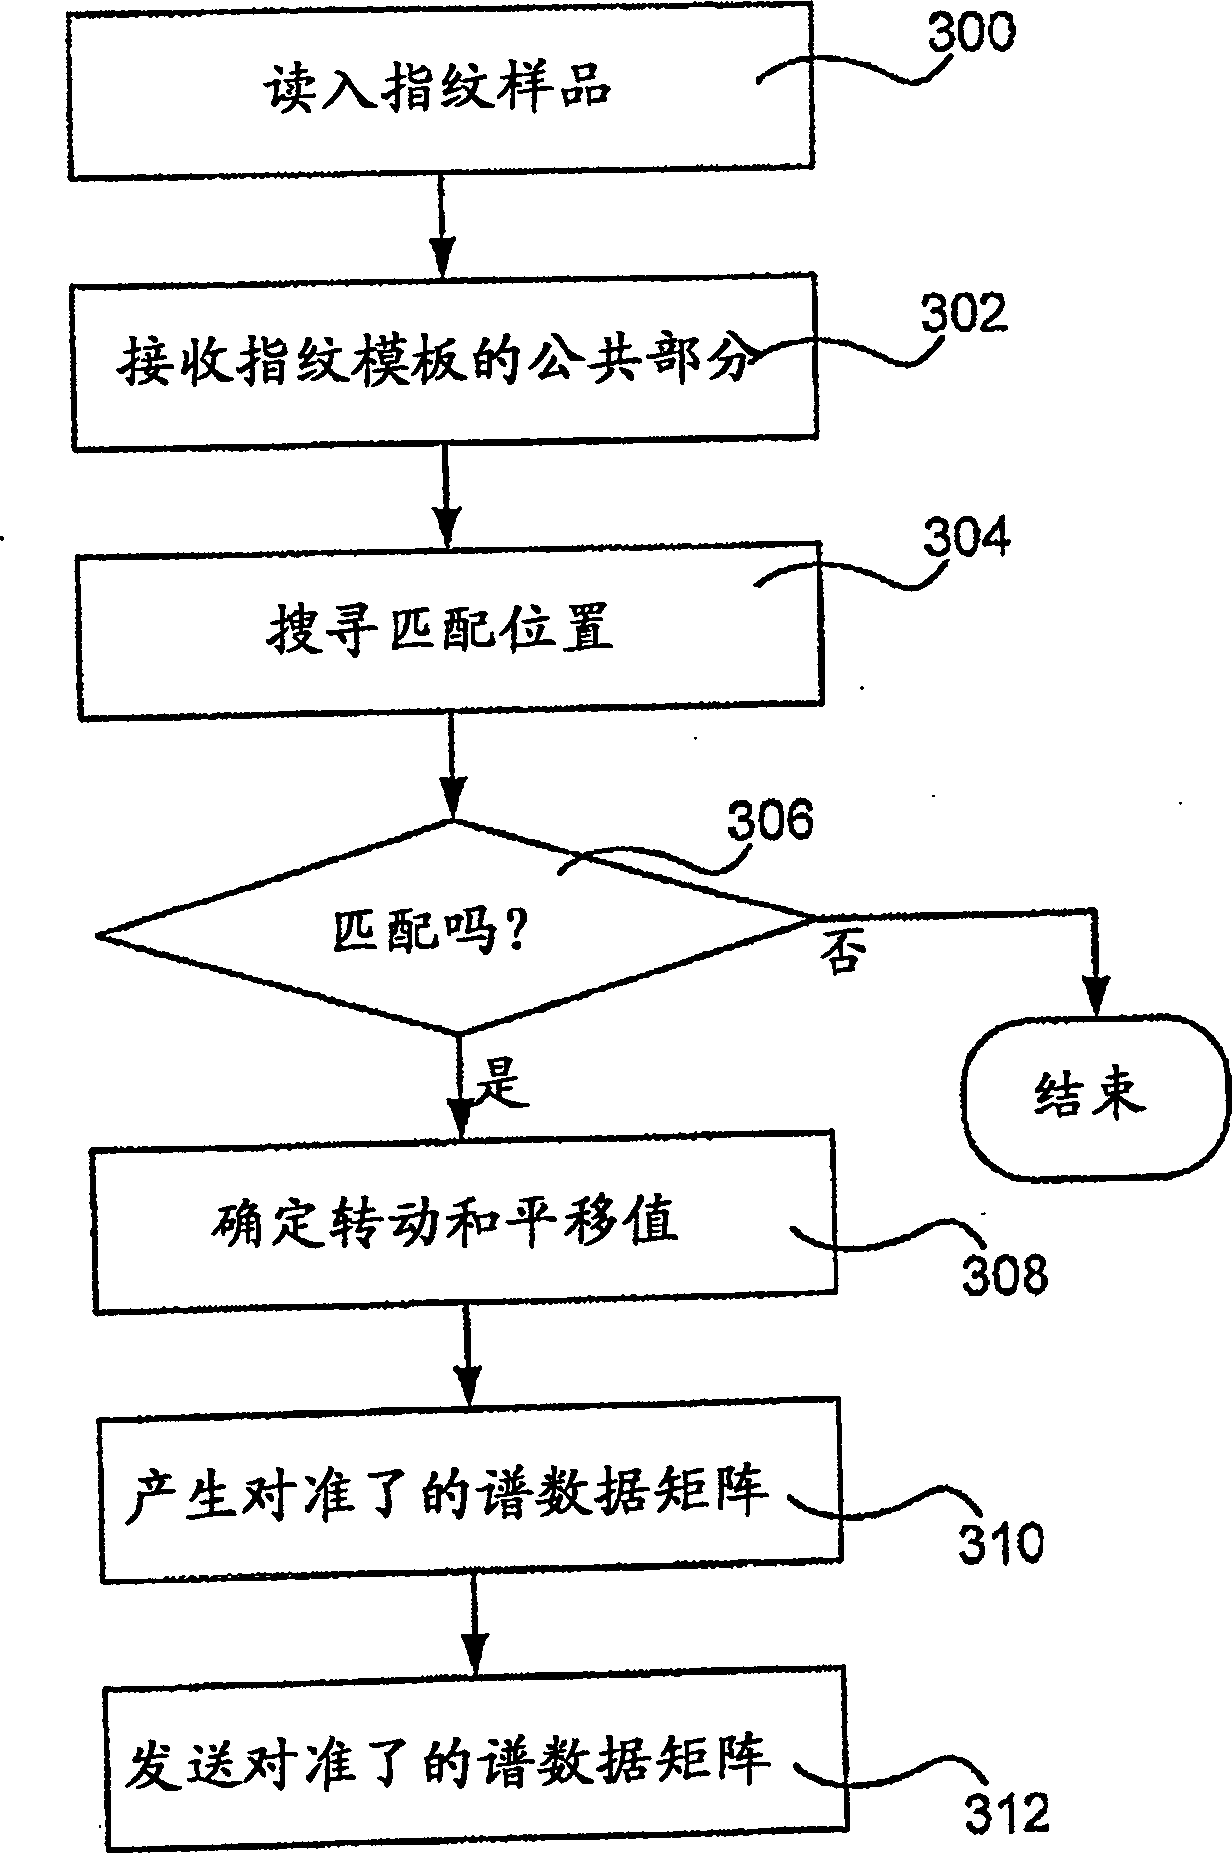 Method and device for improved fingerprint matching